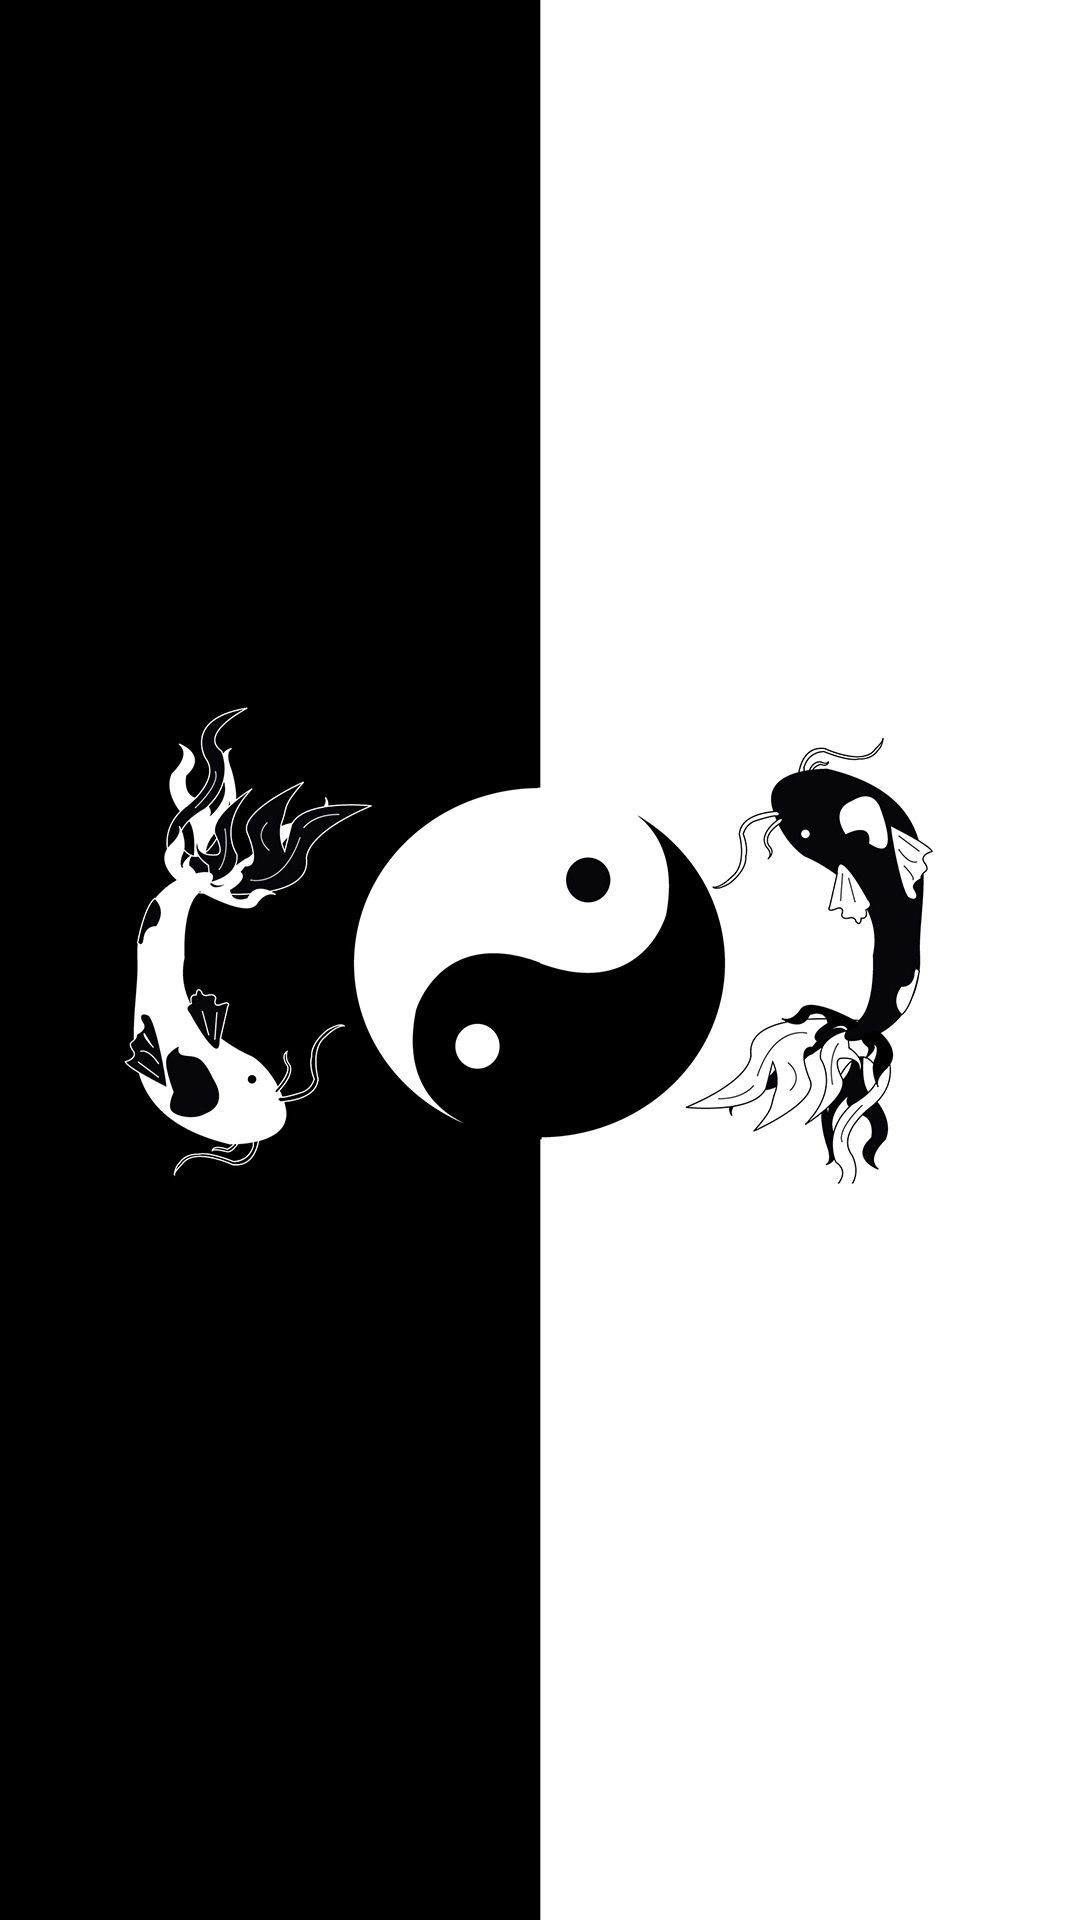 417 Wallpaper Yin Yang For Android Images - MyWeb